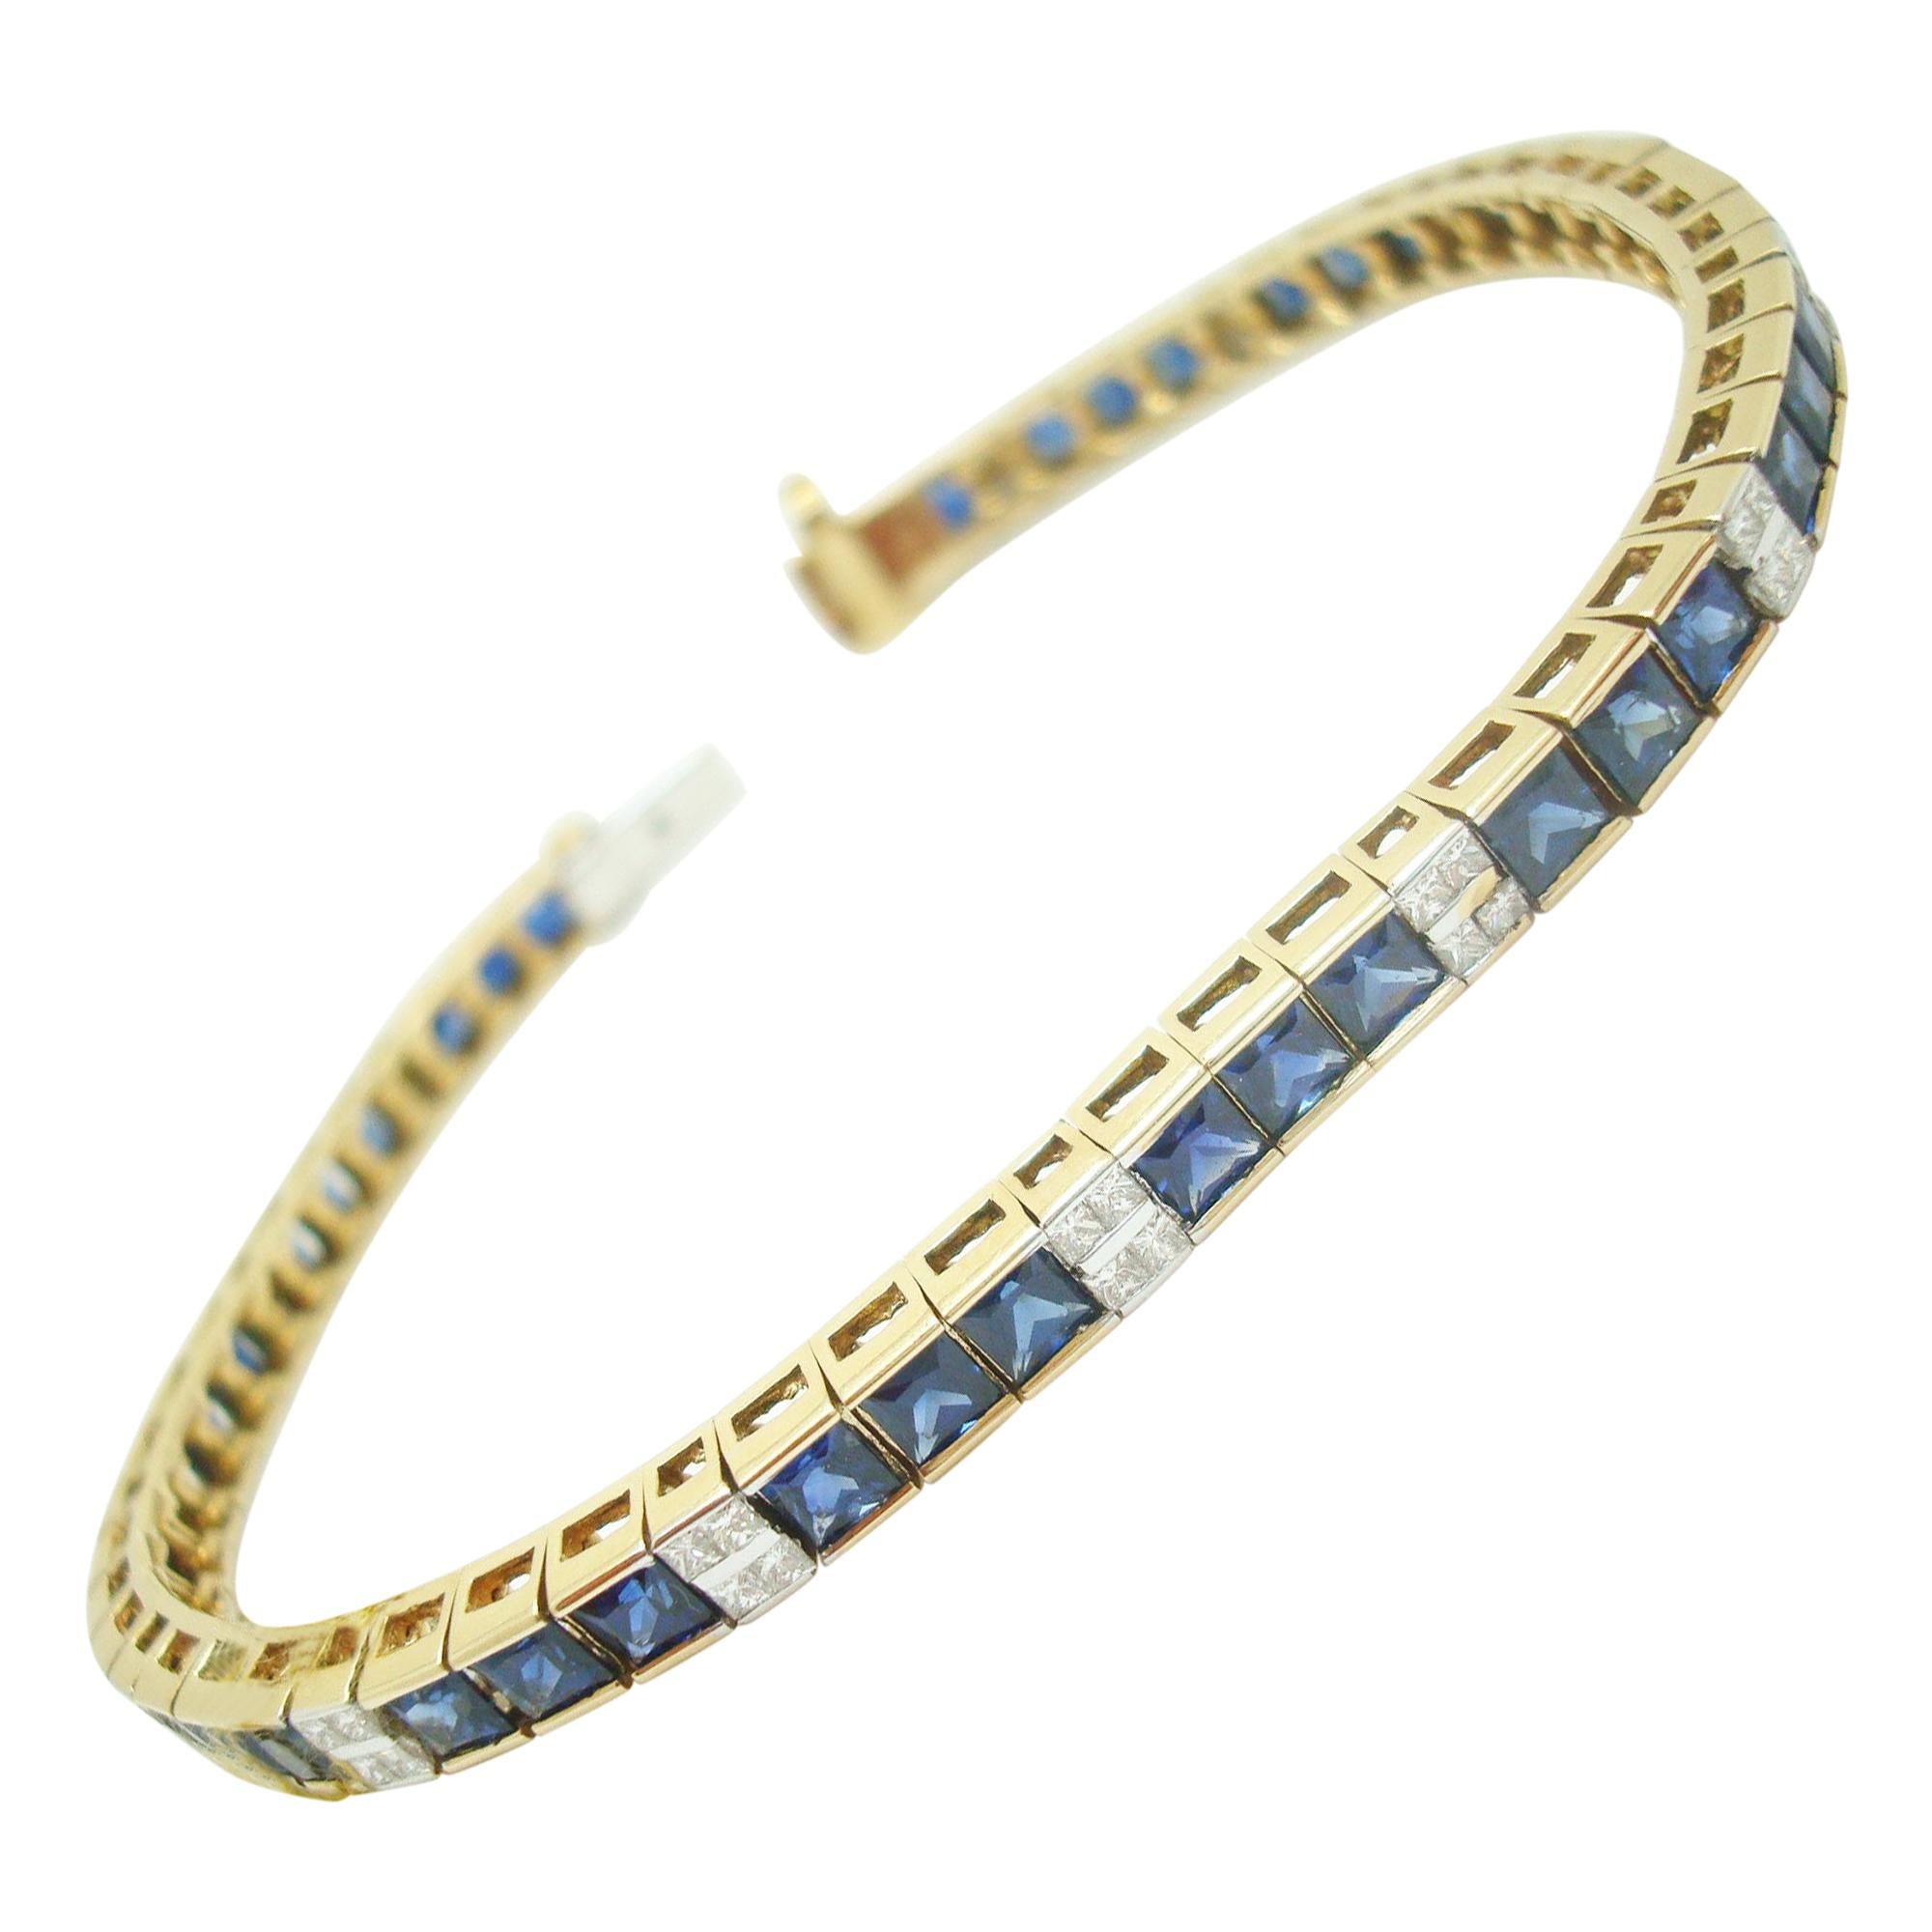 Gold Sapphire Bracelet with 15 Carats of Genuine Natural Blue Sapphires '#J480'